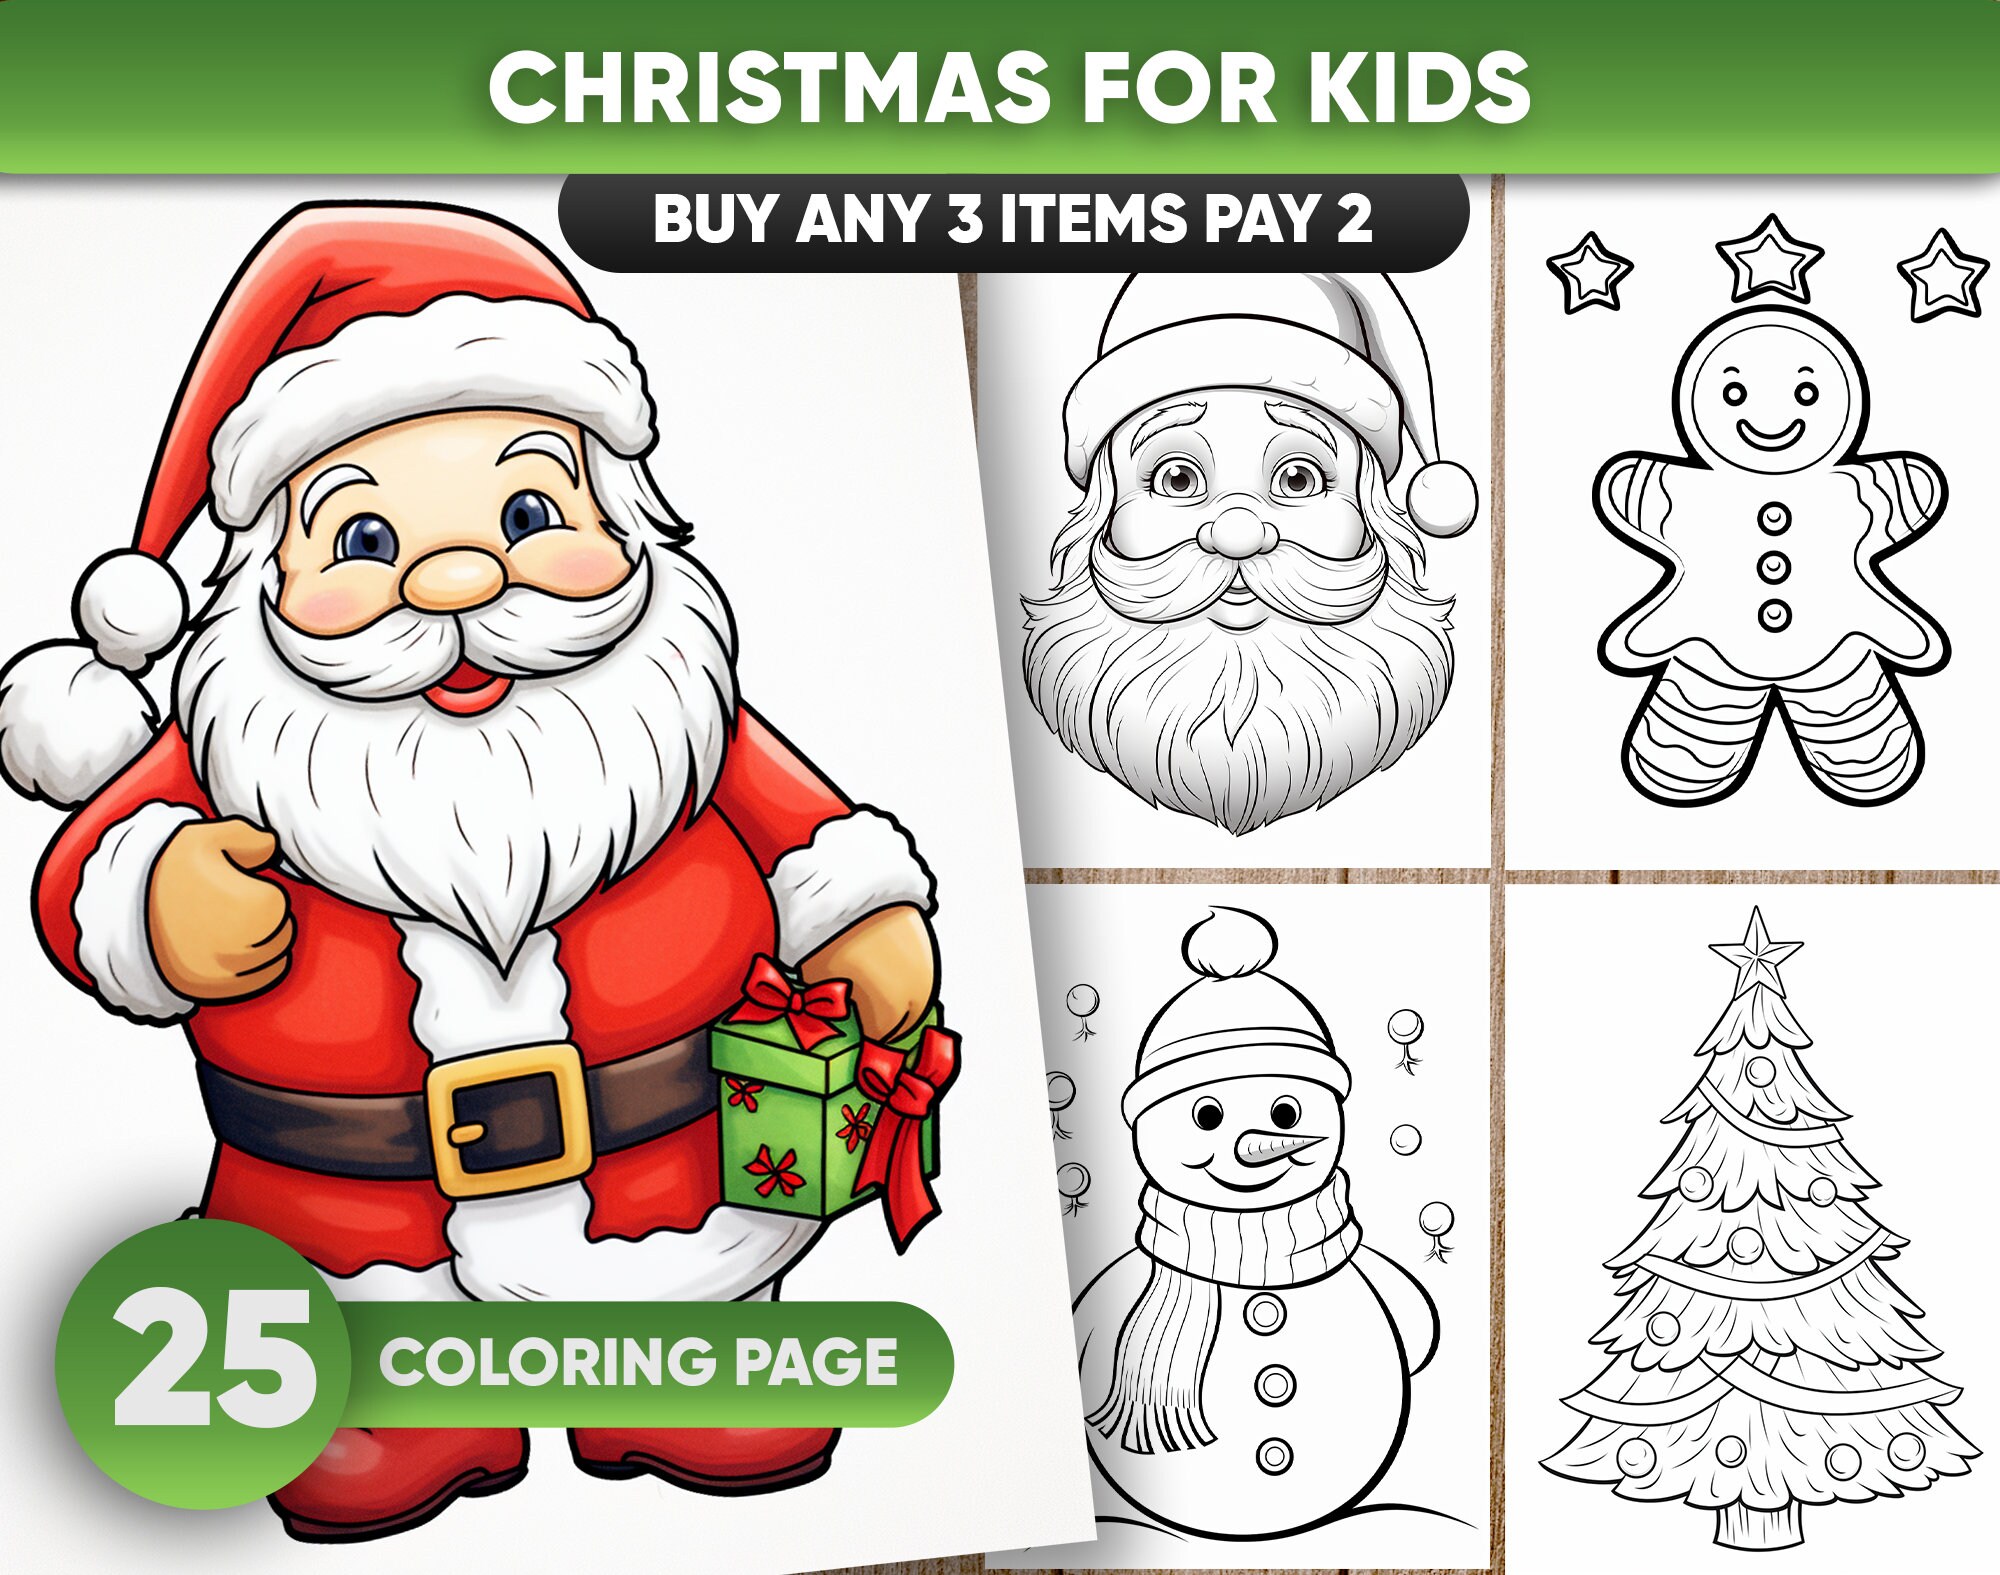 Gingerbread Coloring Page Bundle Cute Holiday Coloring Pages Christmas  Adult Coloring Book Christmas Coloring Pages for Any Age 